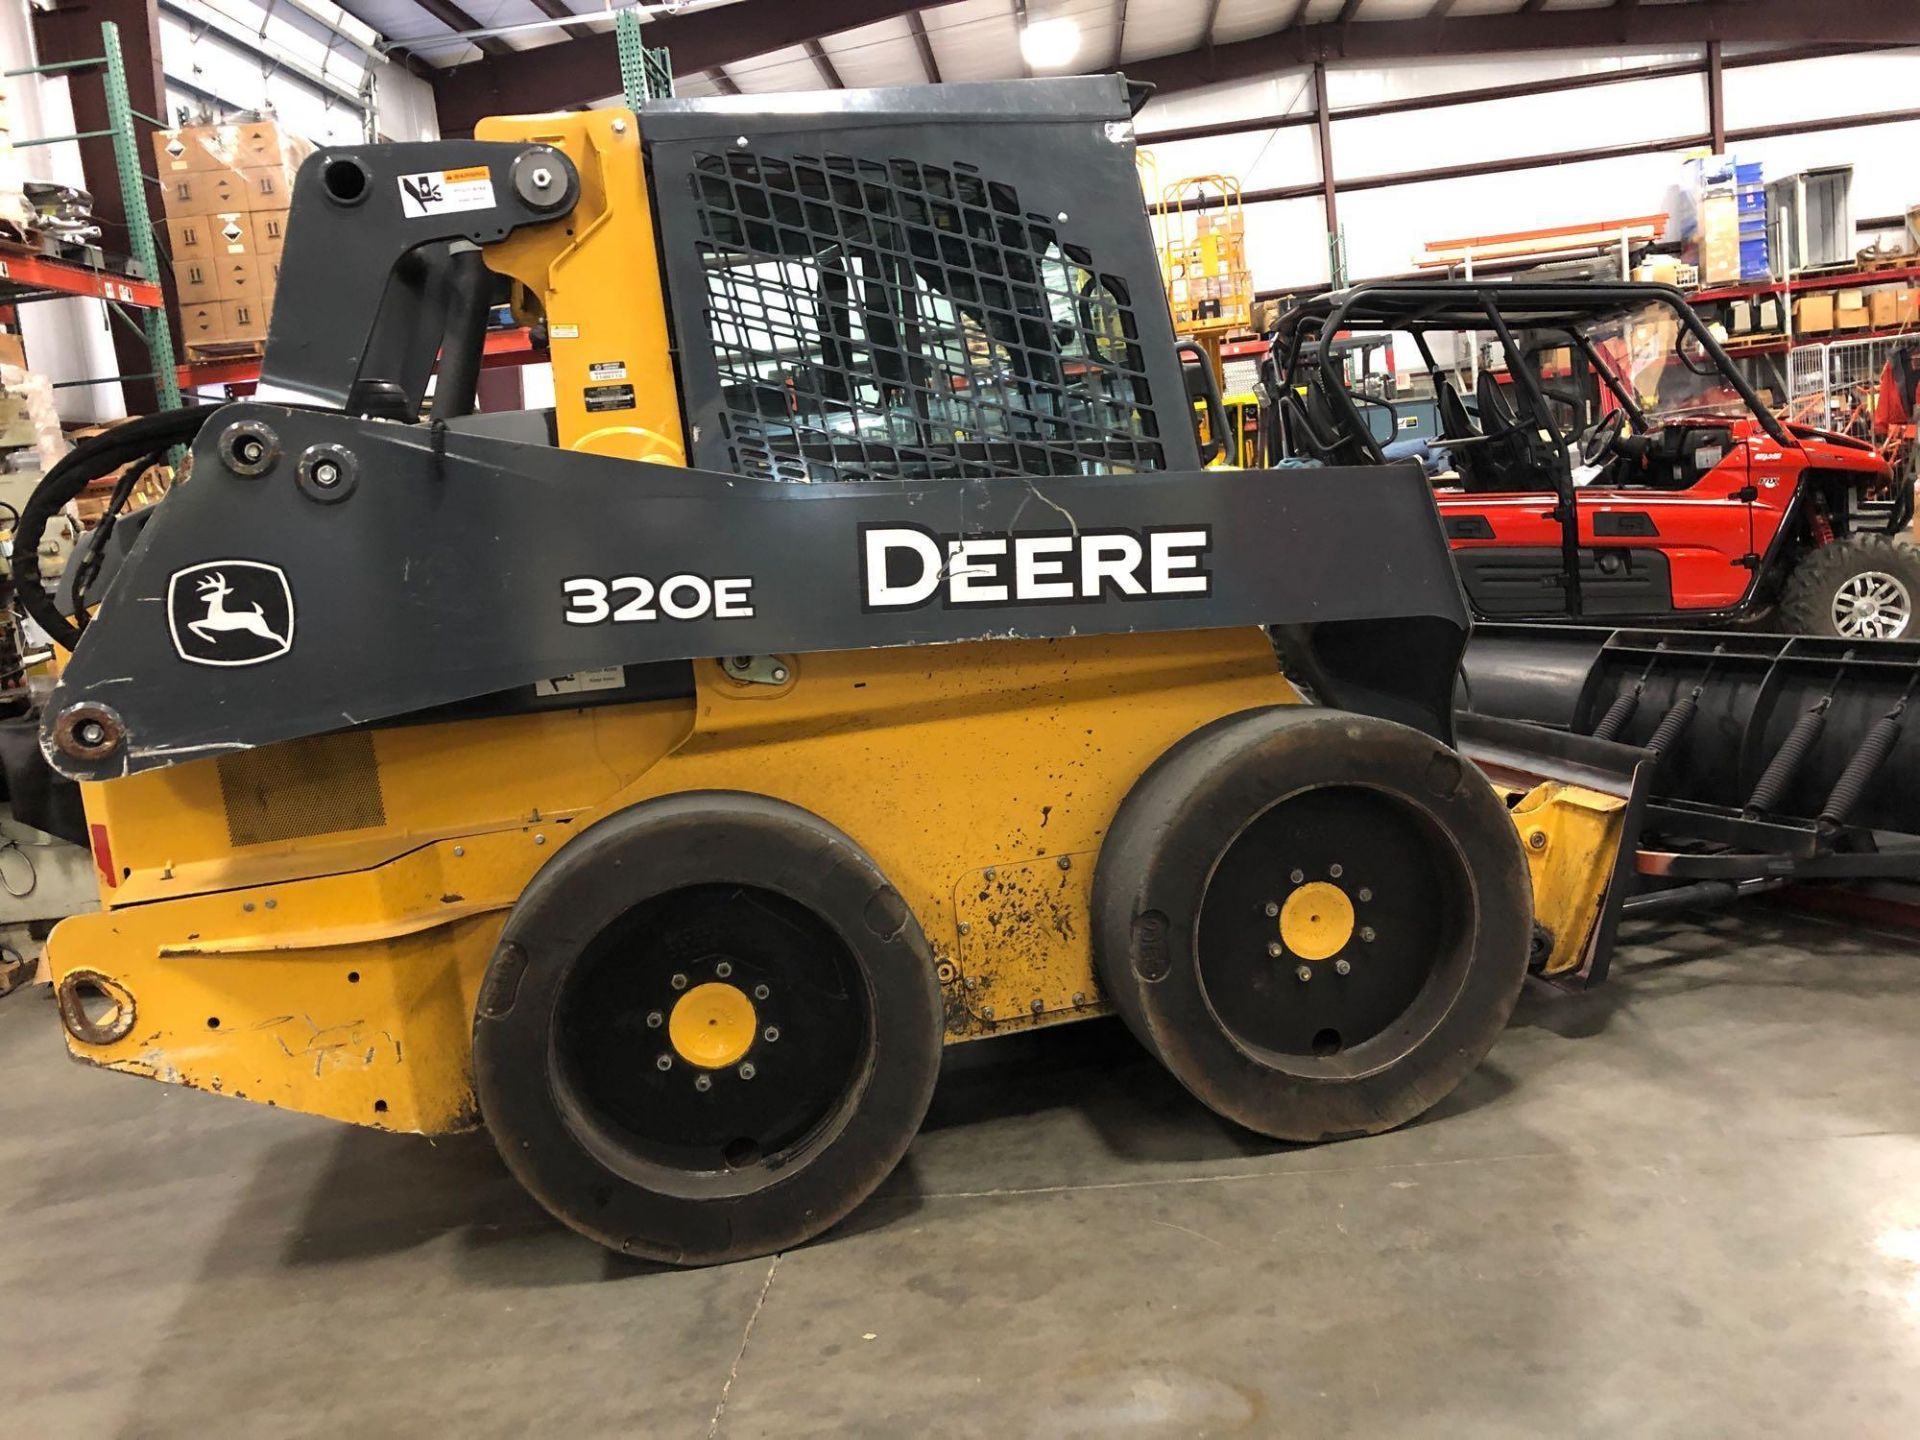 2015 JOHN DEERE 320E SKID STEER, ENCLOSED CAB, HEAT AND A/C 2 SPEED HYDRAULIC COUPLER, RUNS AND OPER - Image 6 of 9